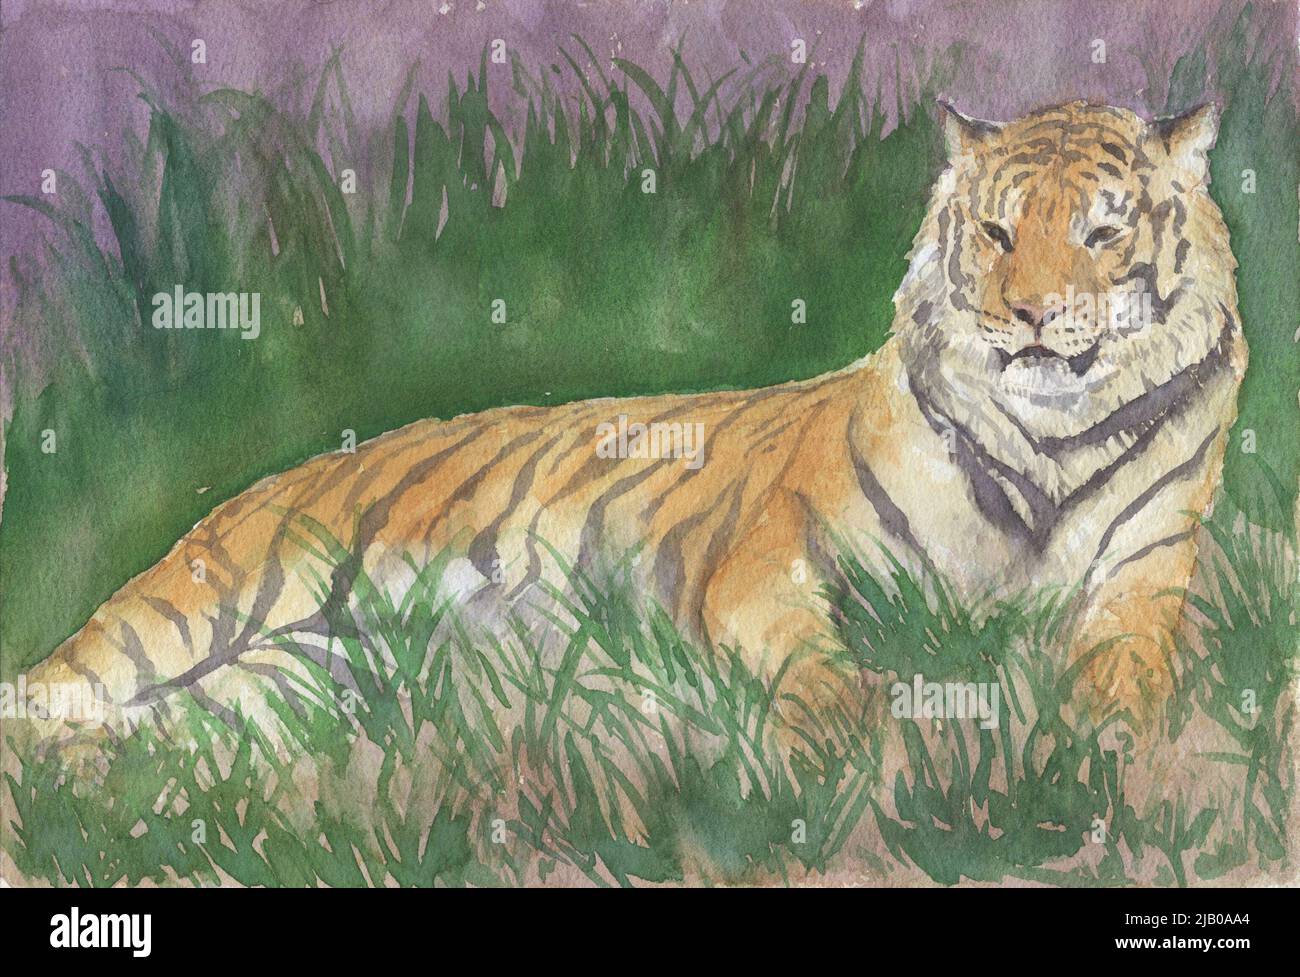 tiger watercolor painting Stock Photo